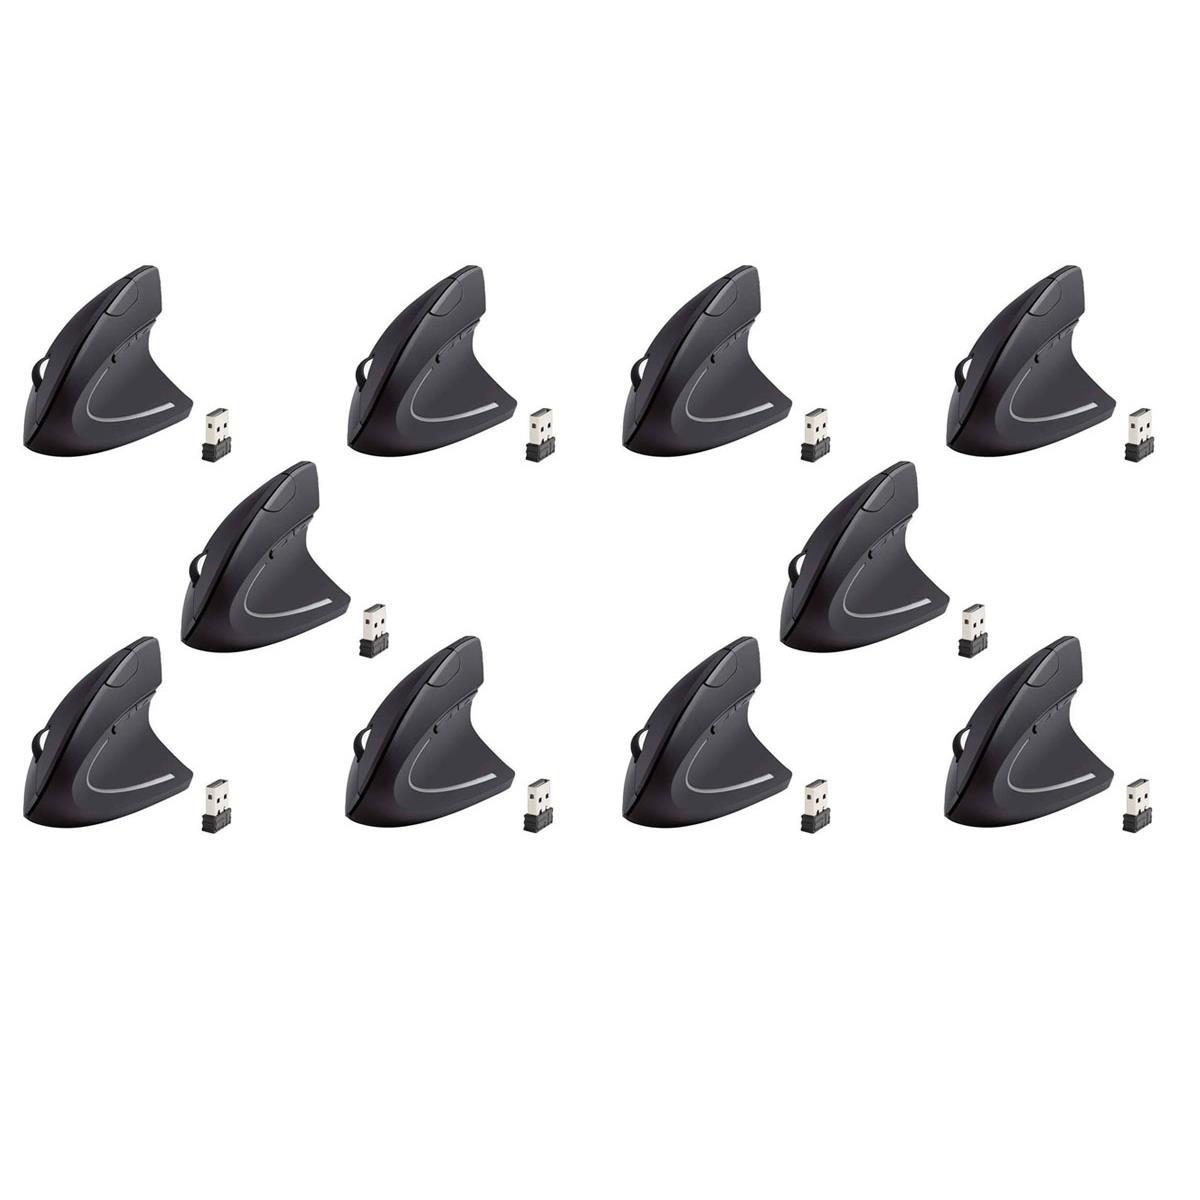 Image of iMicro 10 Pack MO-WVEO01 2.4GHz Wireless Vertical Ergonomic Optical Mouse